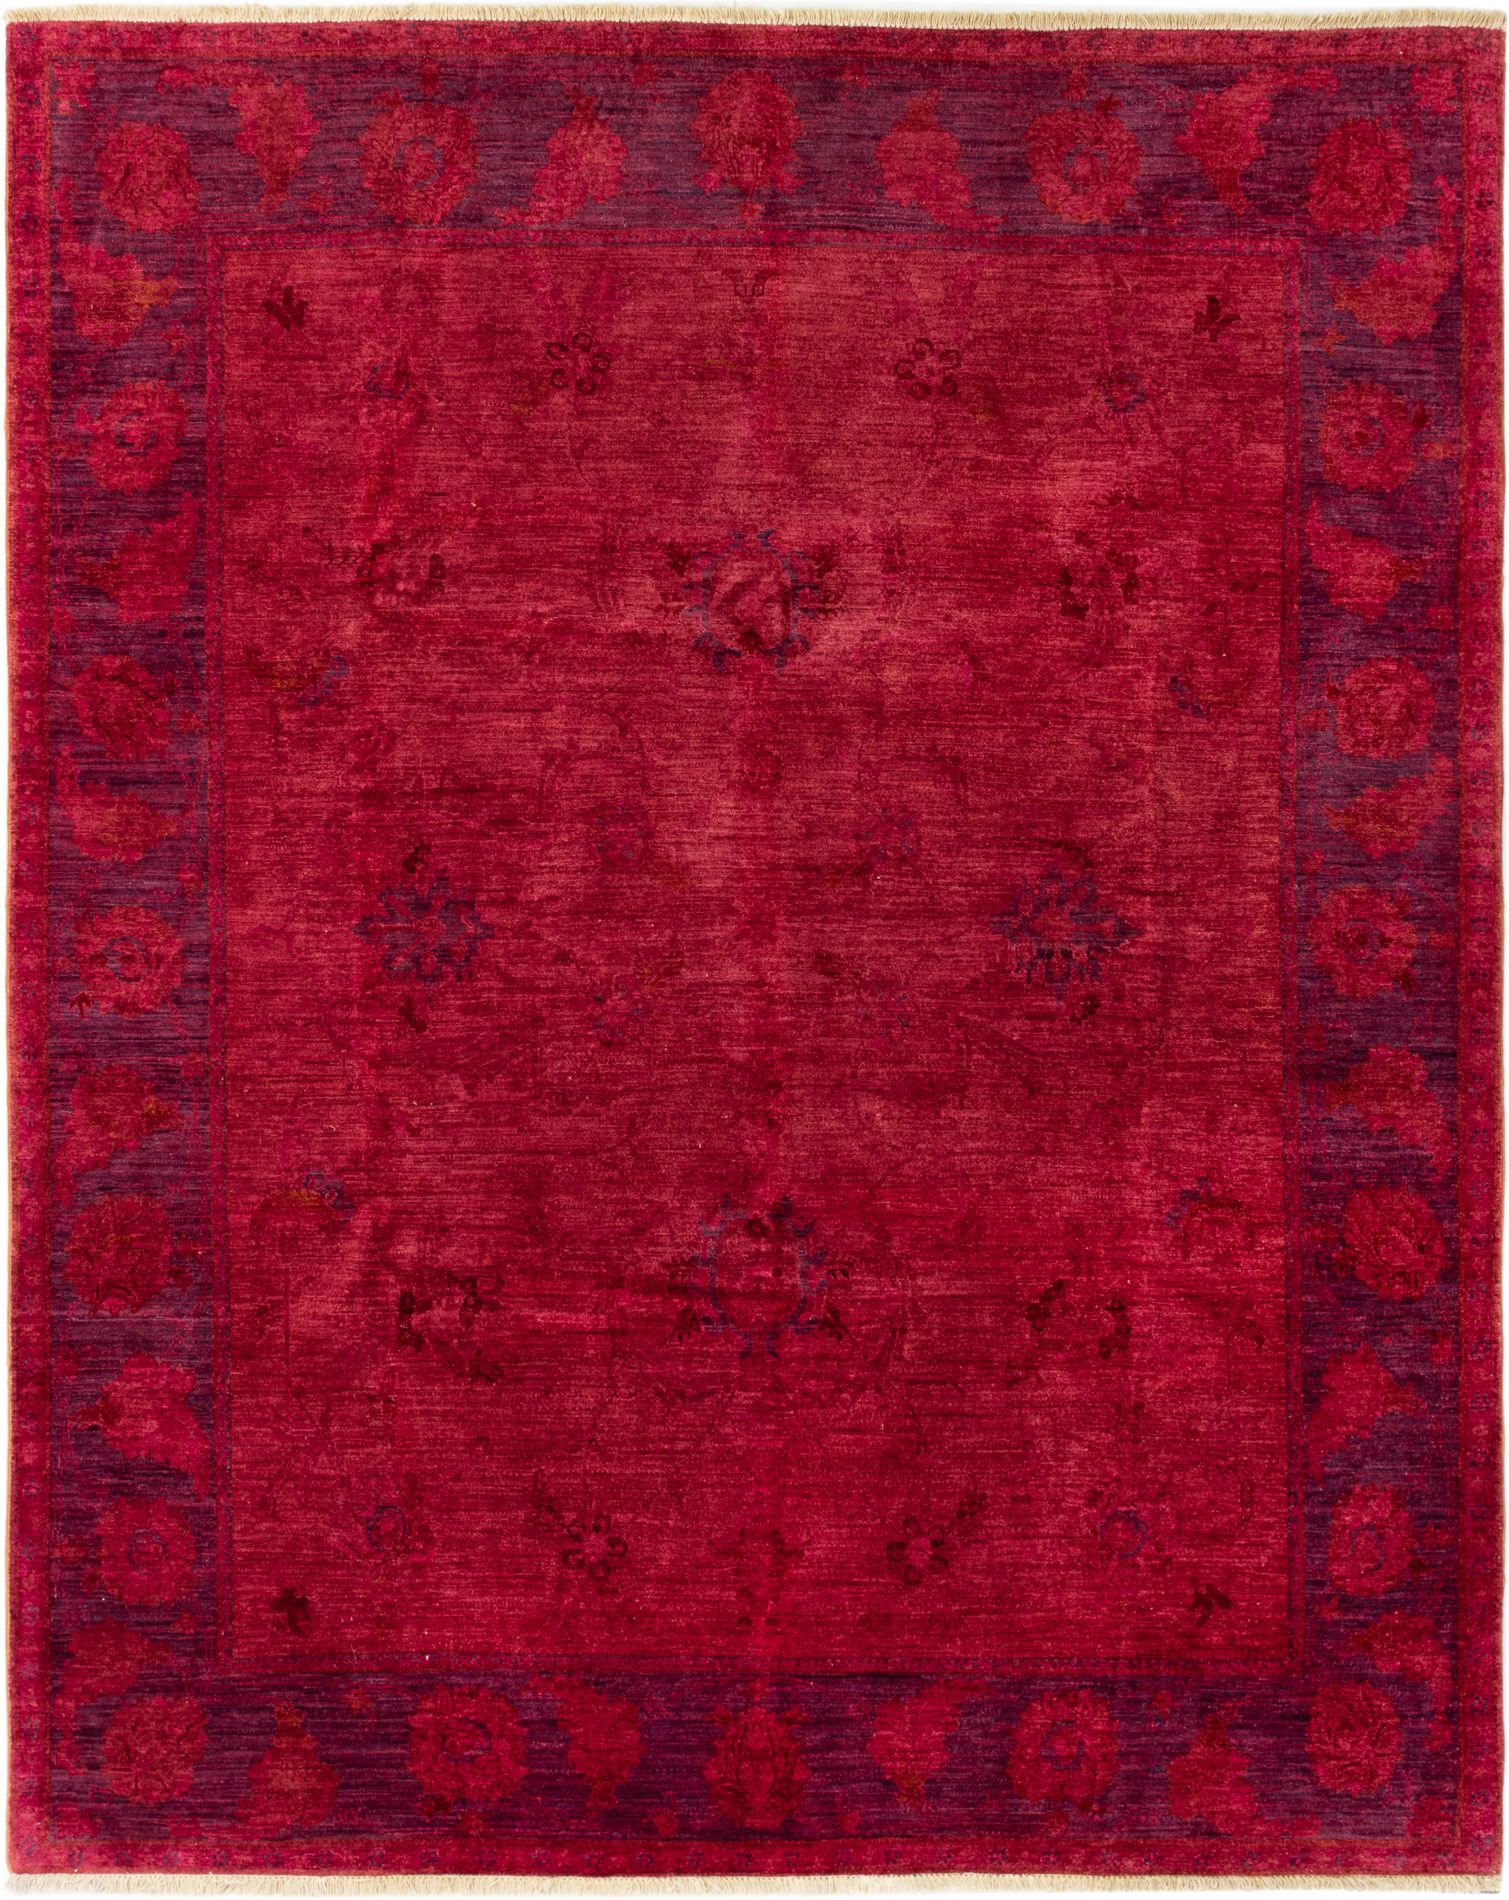 Hand-knotted Color transition Dark Red Wool Rug 7'11" x 9'9" Size: 7'11" x 9'9"  